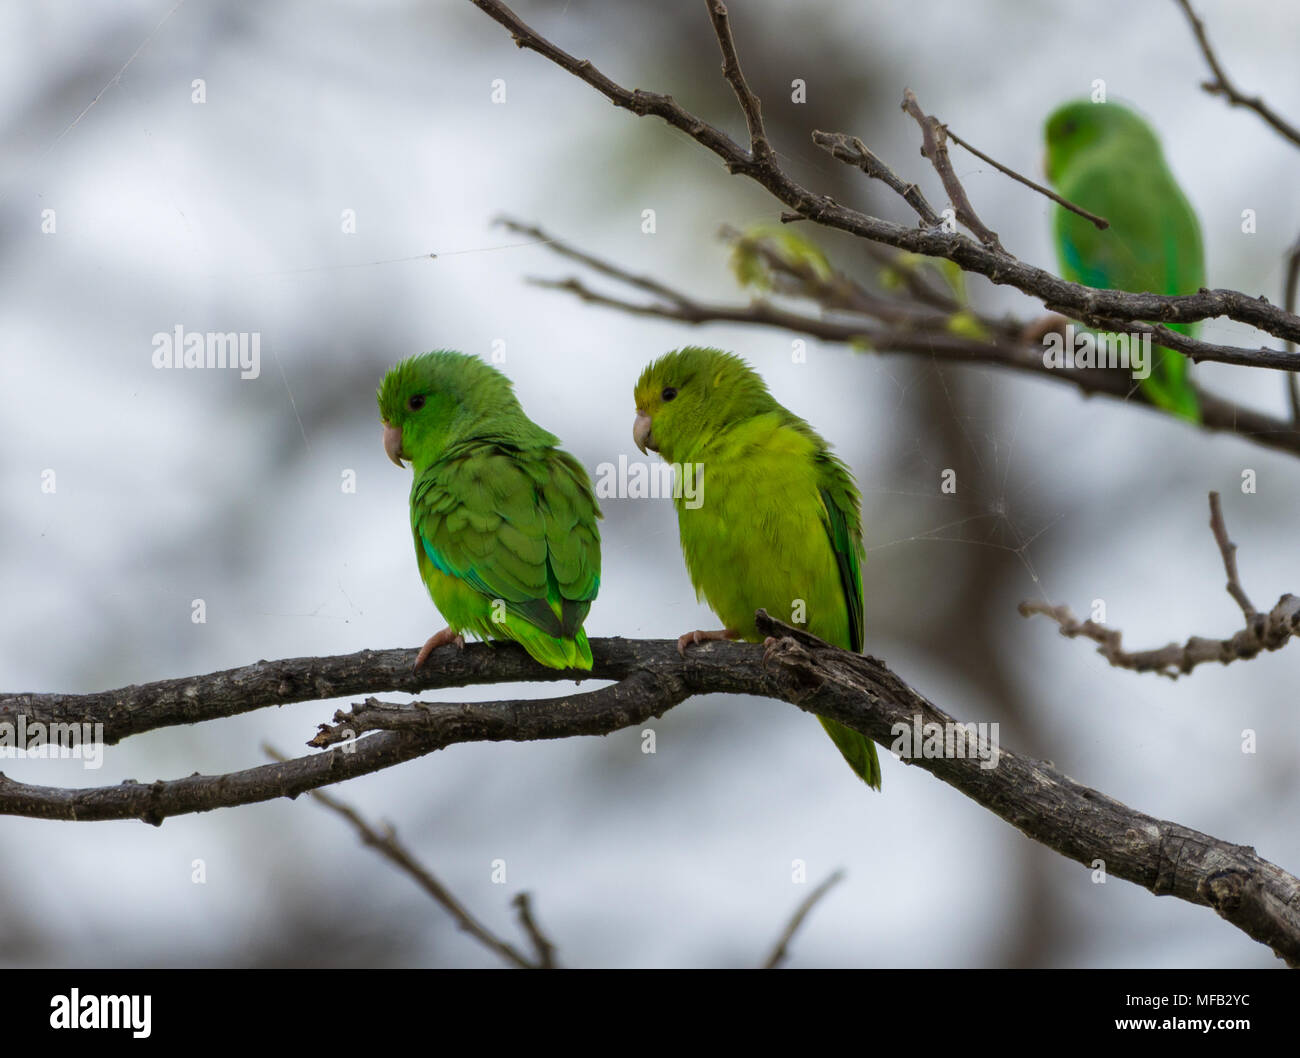 A pair of Green-rumped Parrotlet (Forpus passerinus) perched on branches. Colombia, South America. Stock Photo